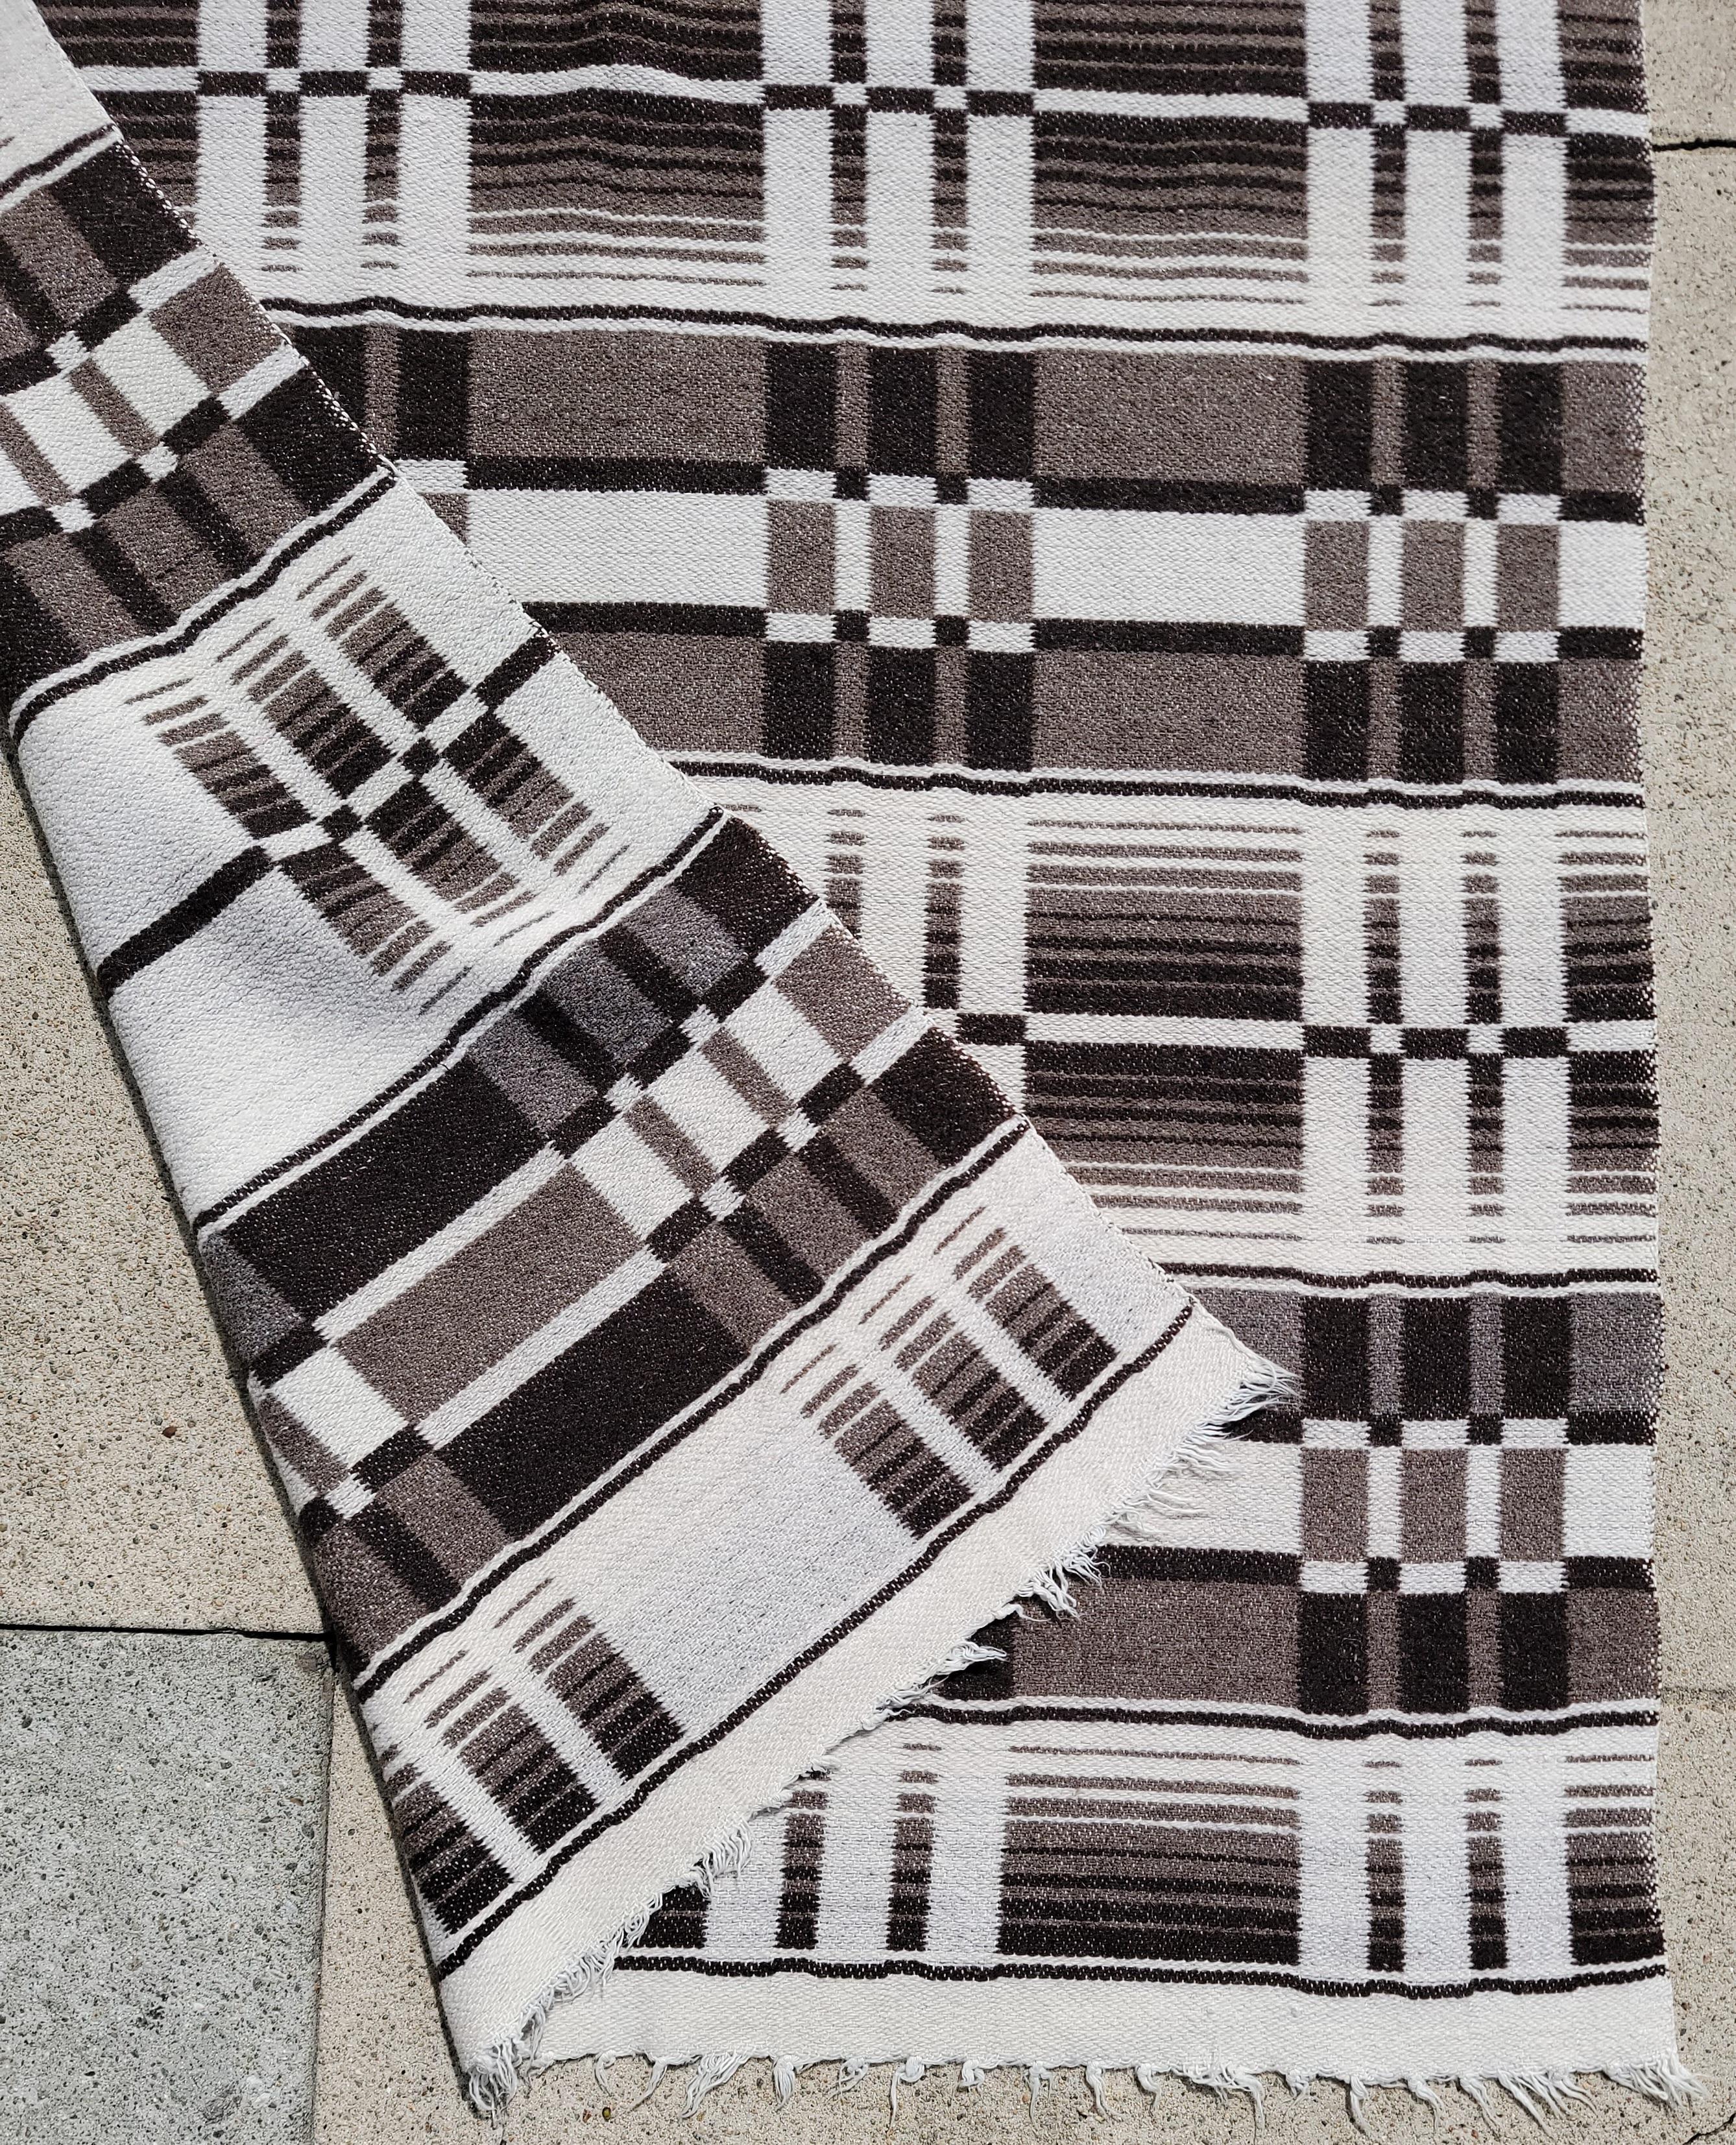 Hand-Woven Amazing Brown and White Horse Blanket 